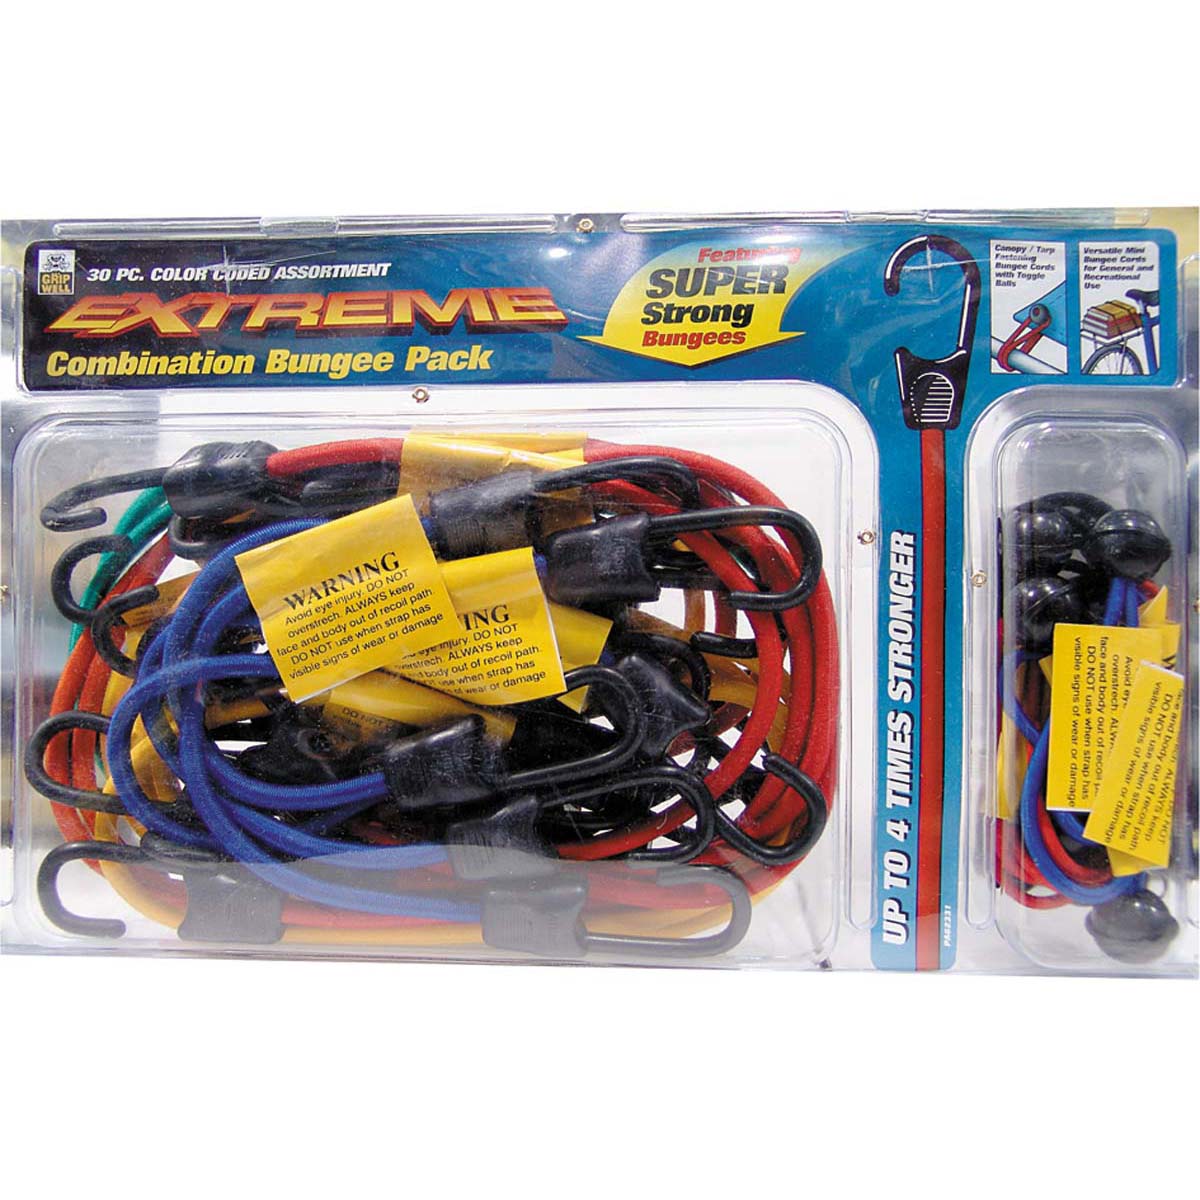 Bungee Cord Kit - 30 Pack